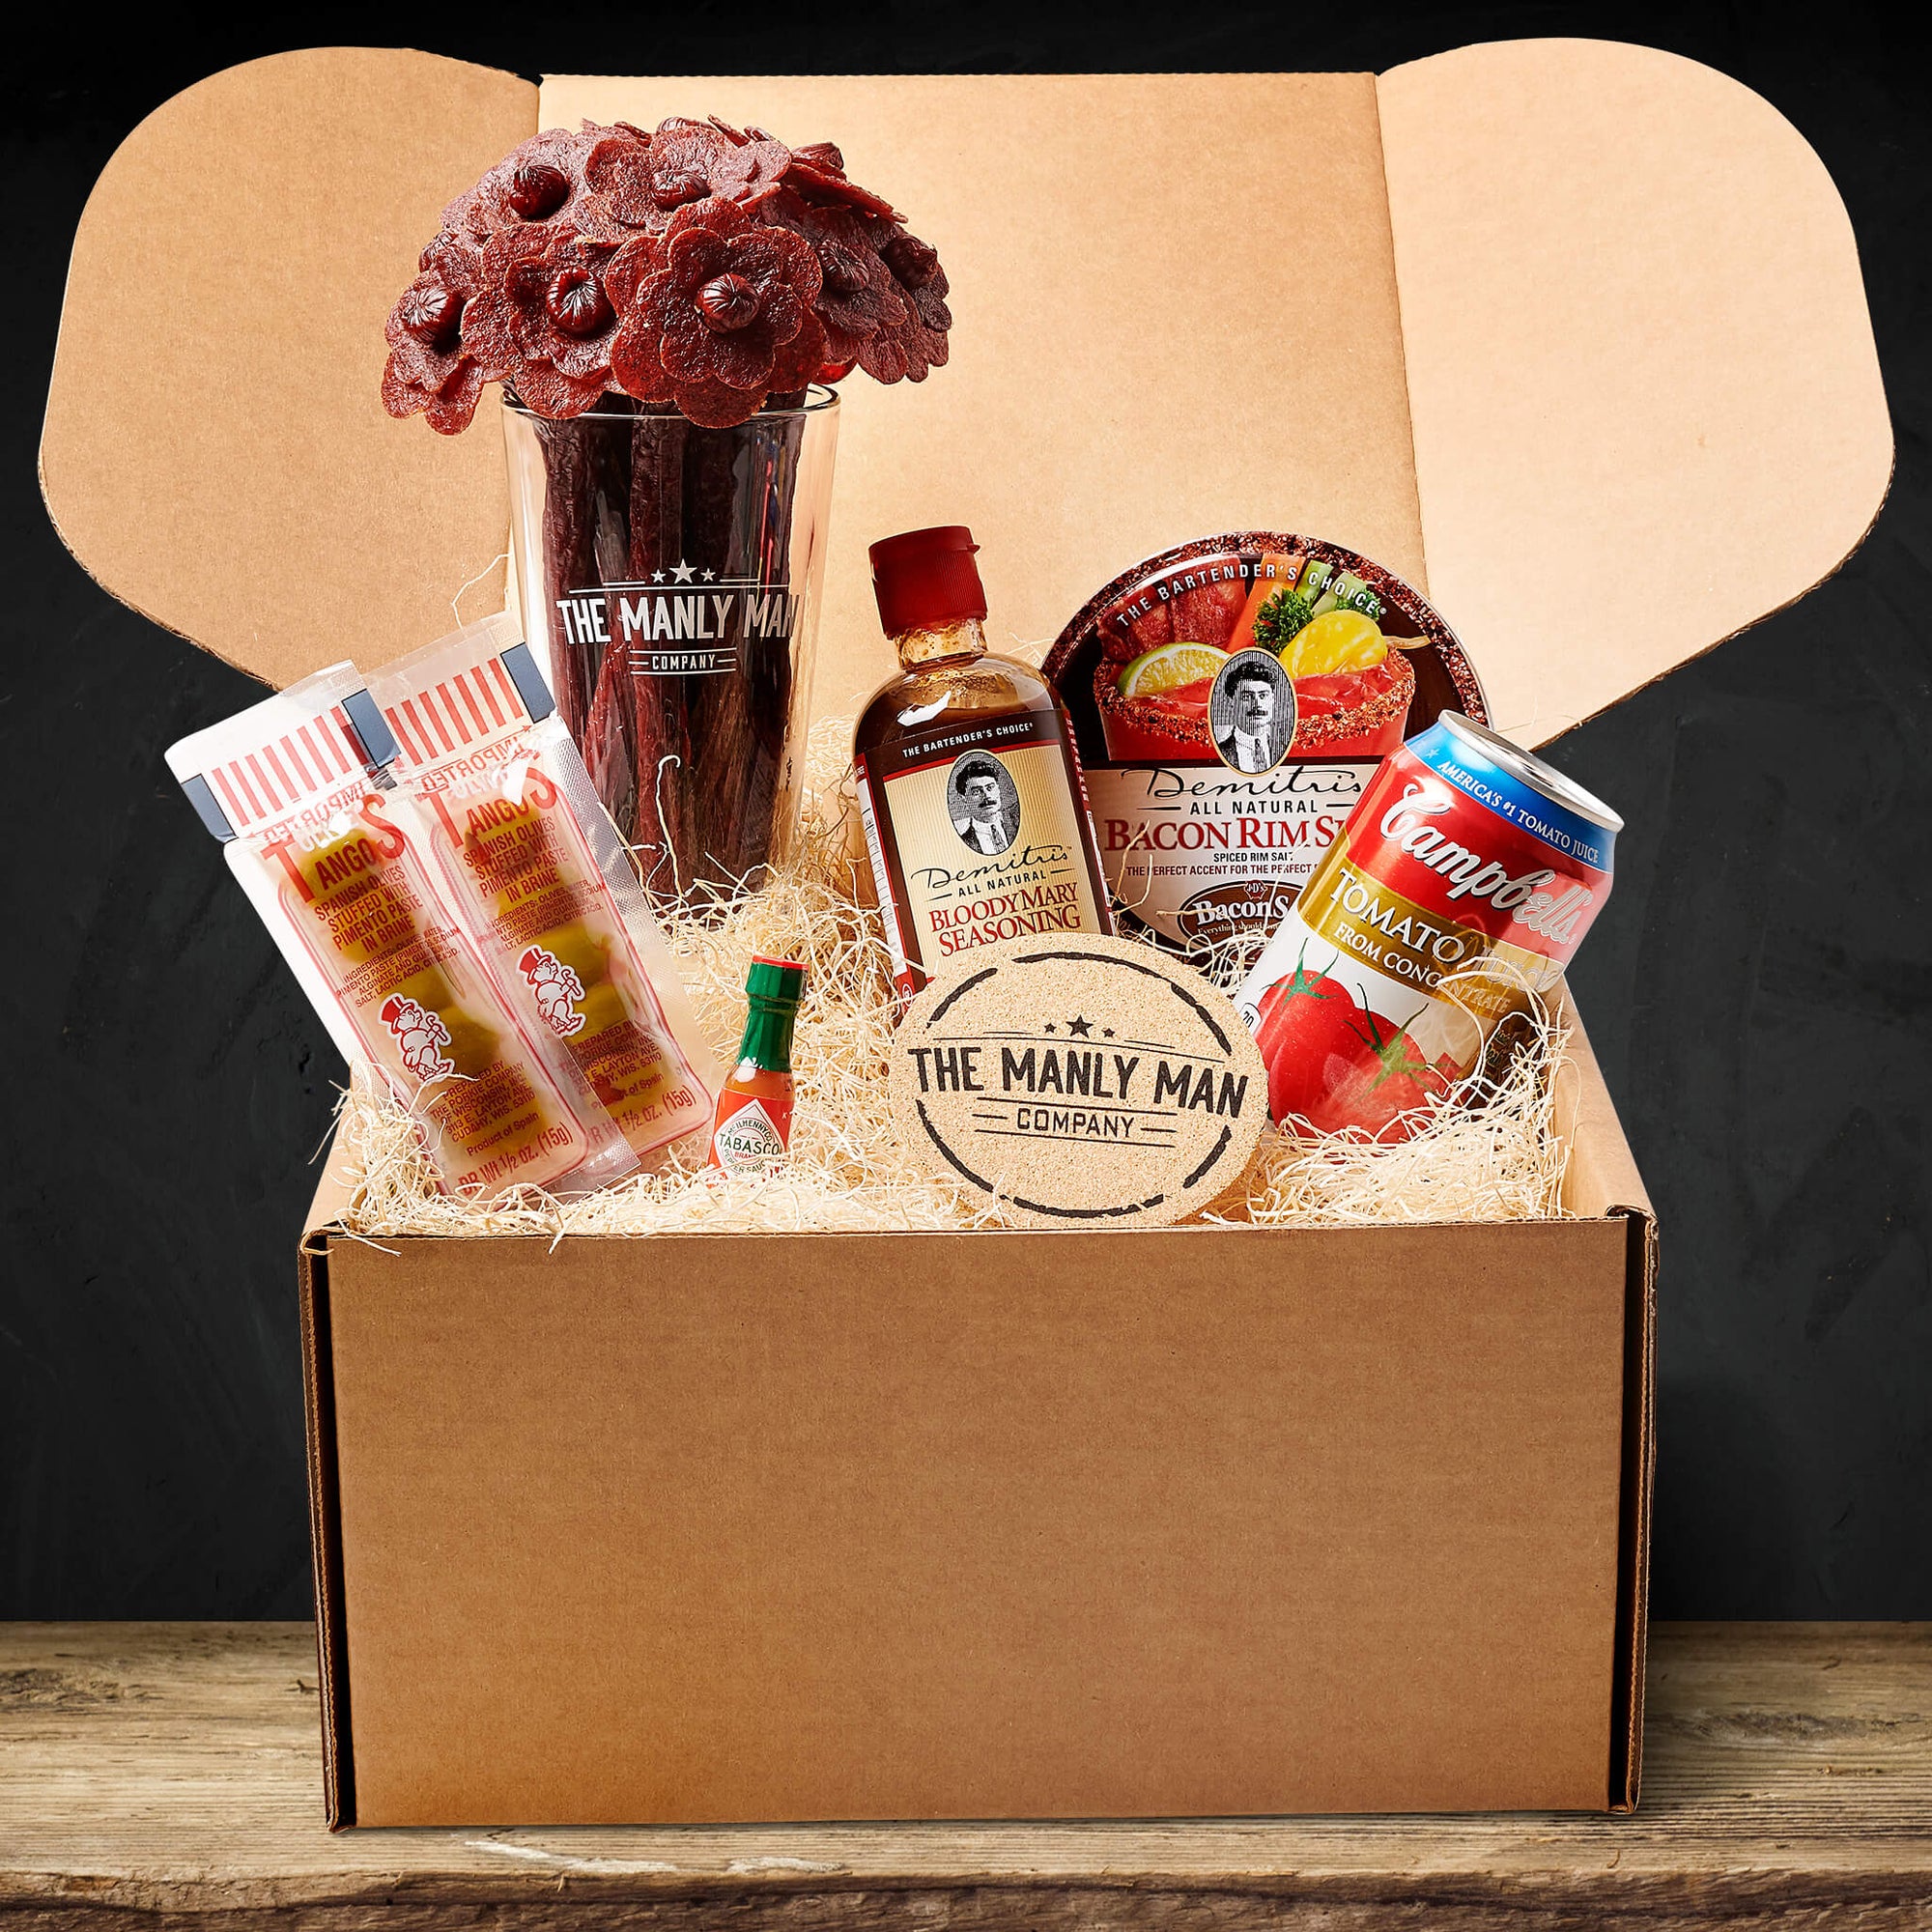 Bloody Mary kit on wood table and in front of black background, delivered as a gift for men